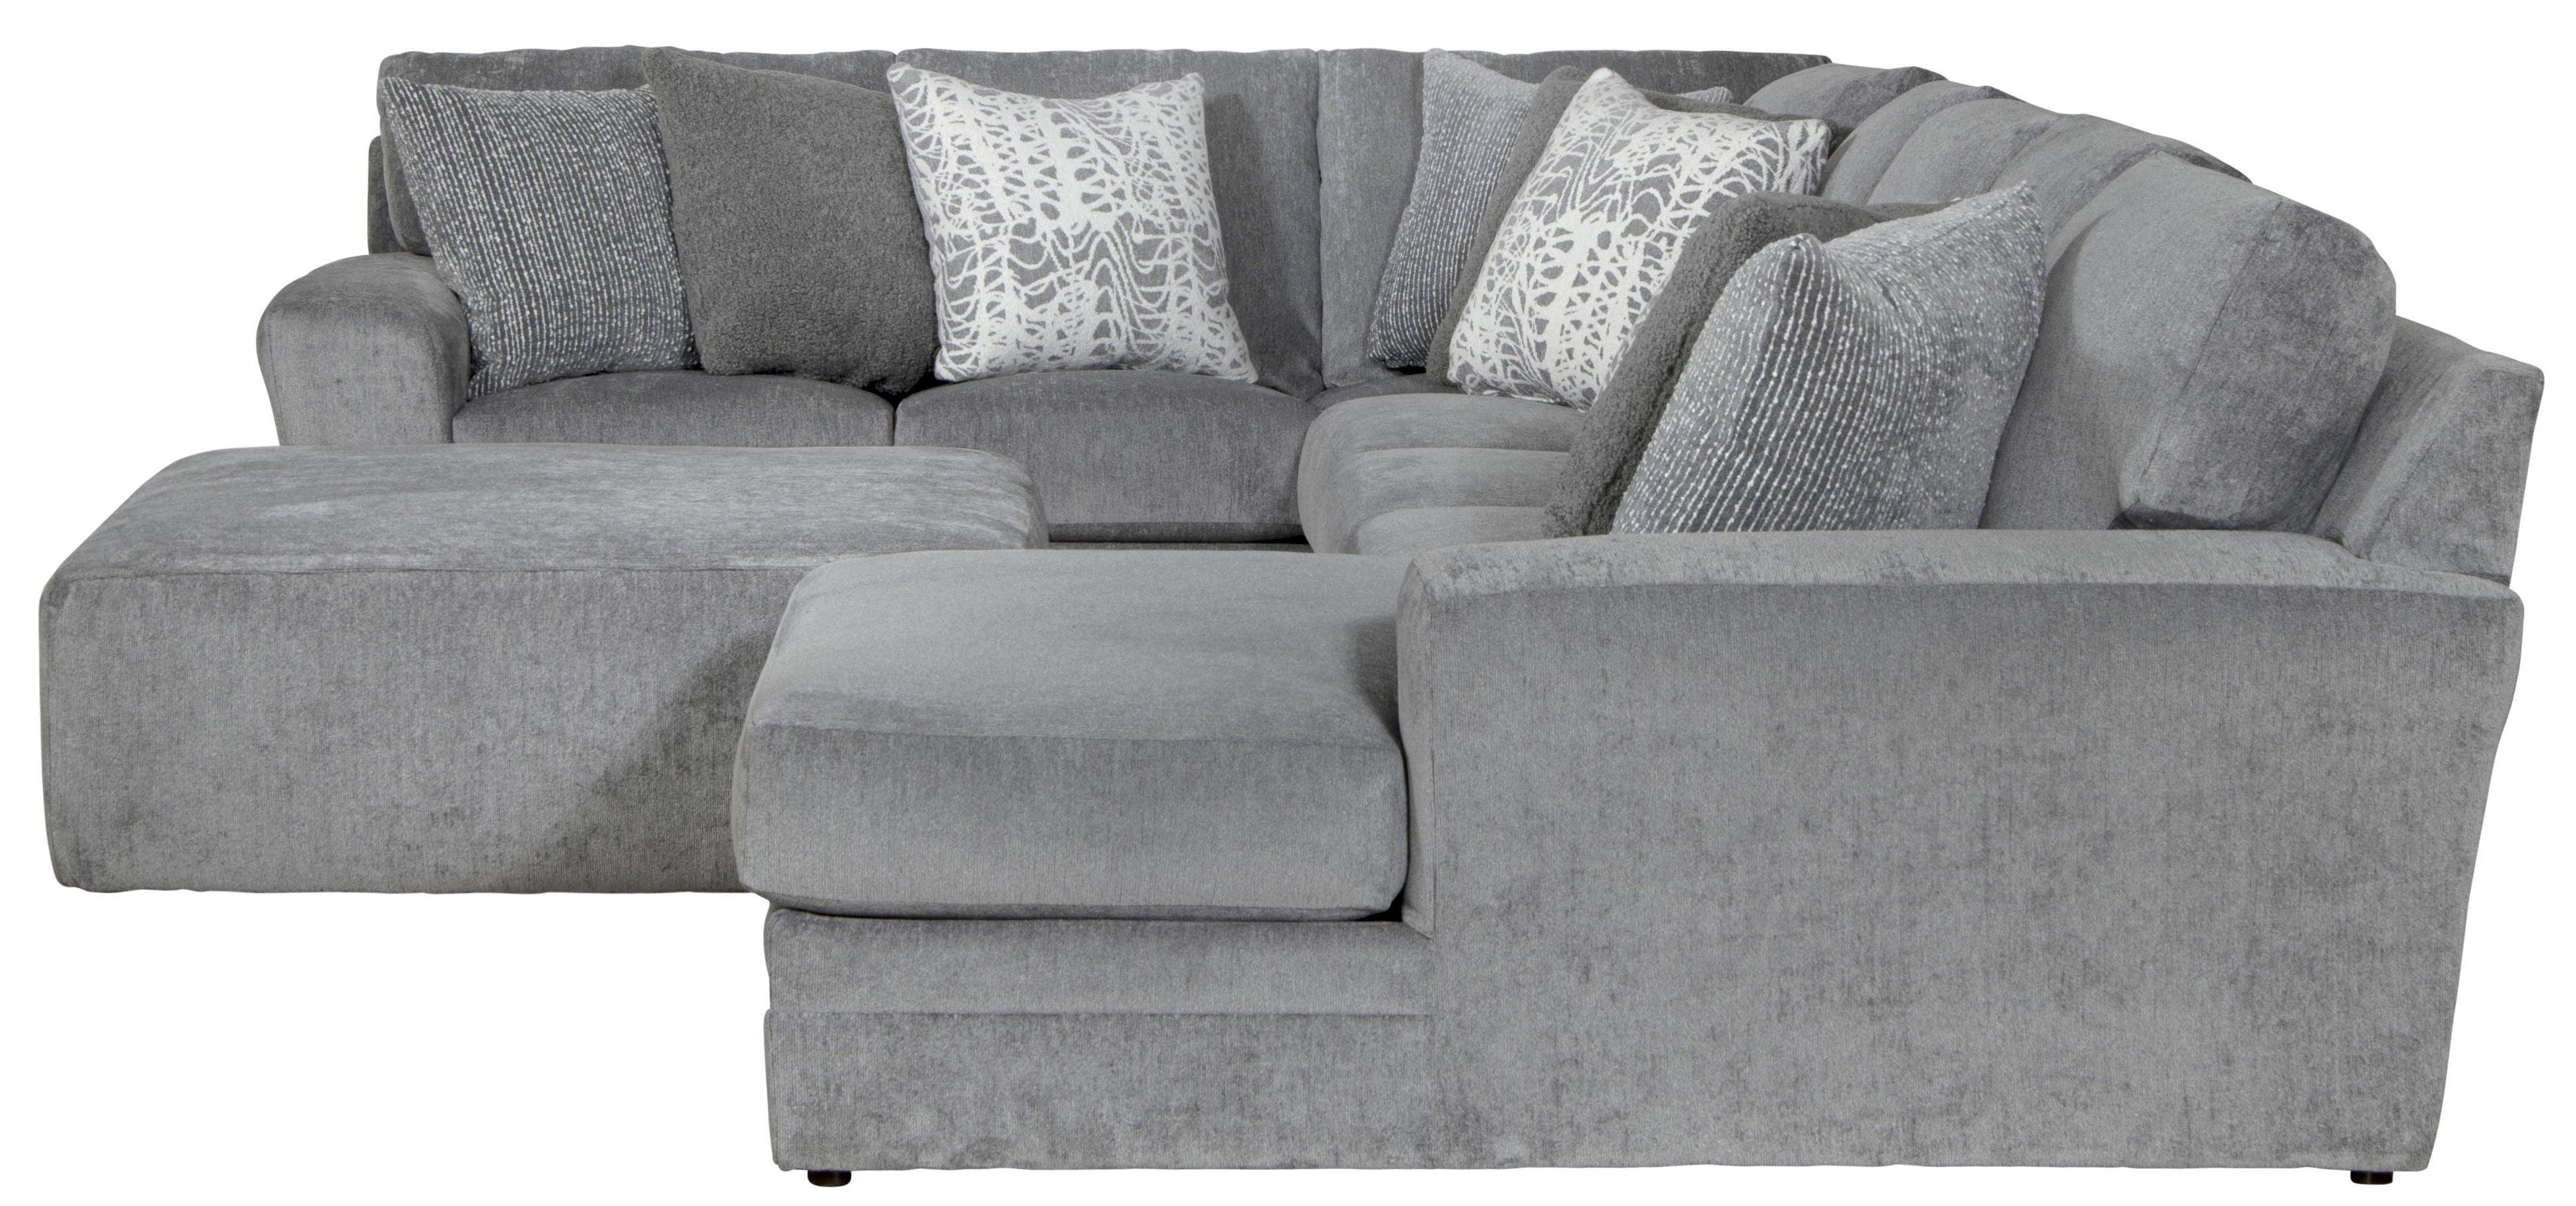 Jackson - Glacier - Sectional With 9 Accent Pillows And Ottoman Set - 5th Avenue Furniture